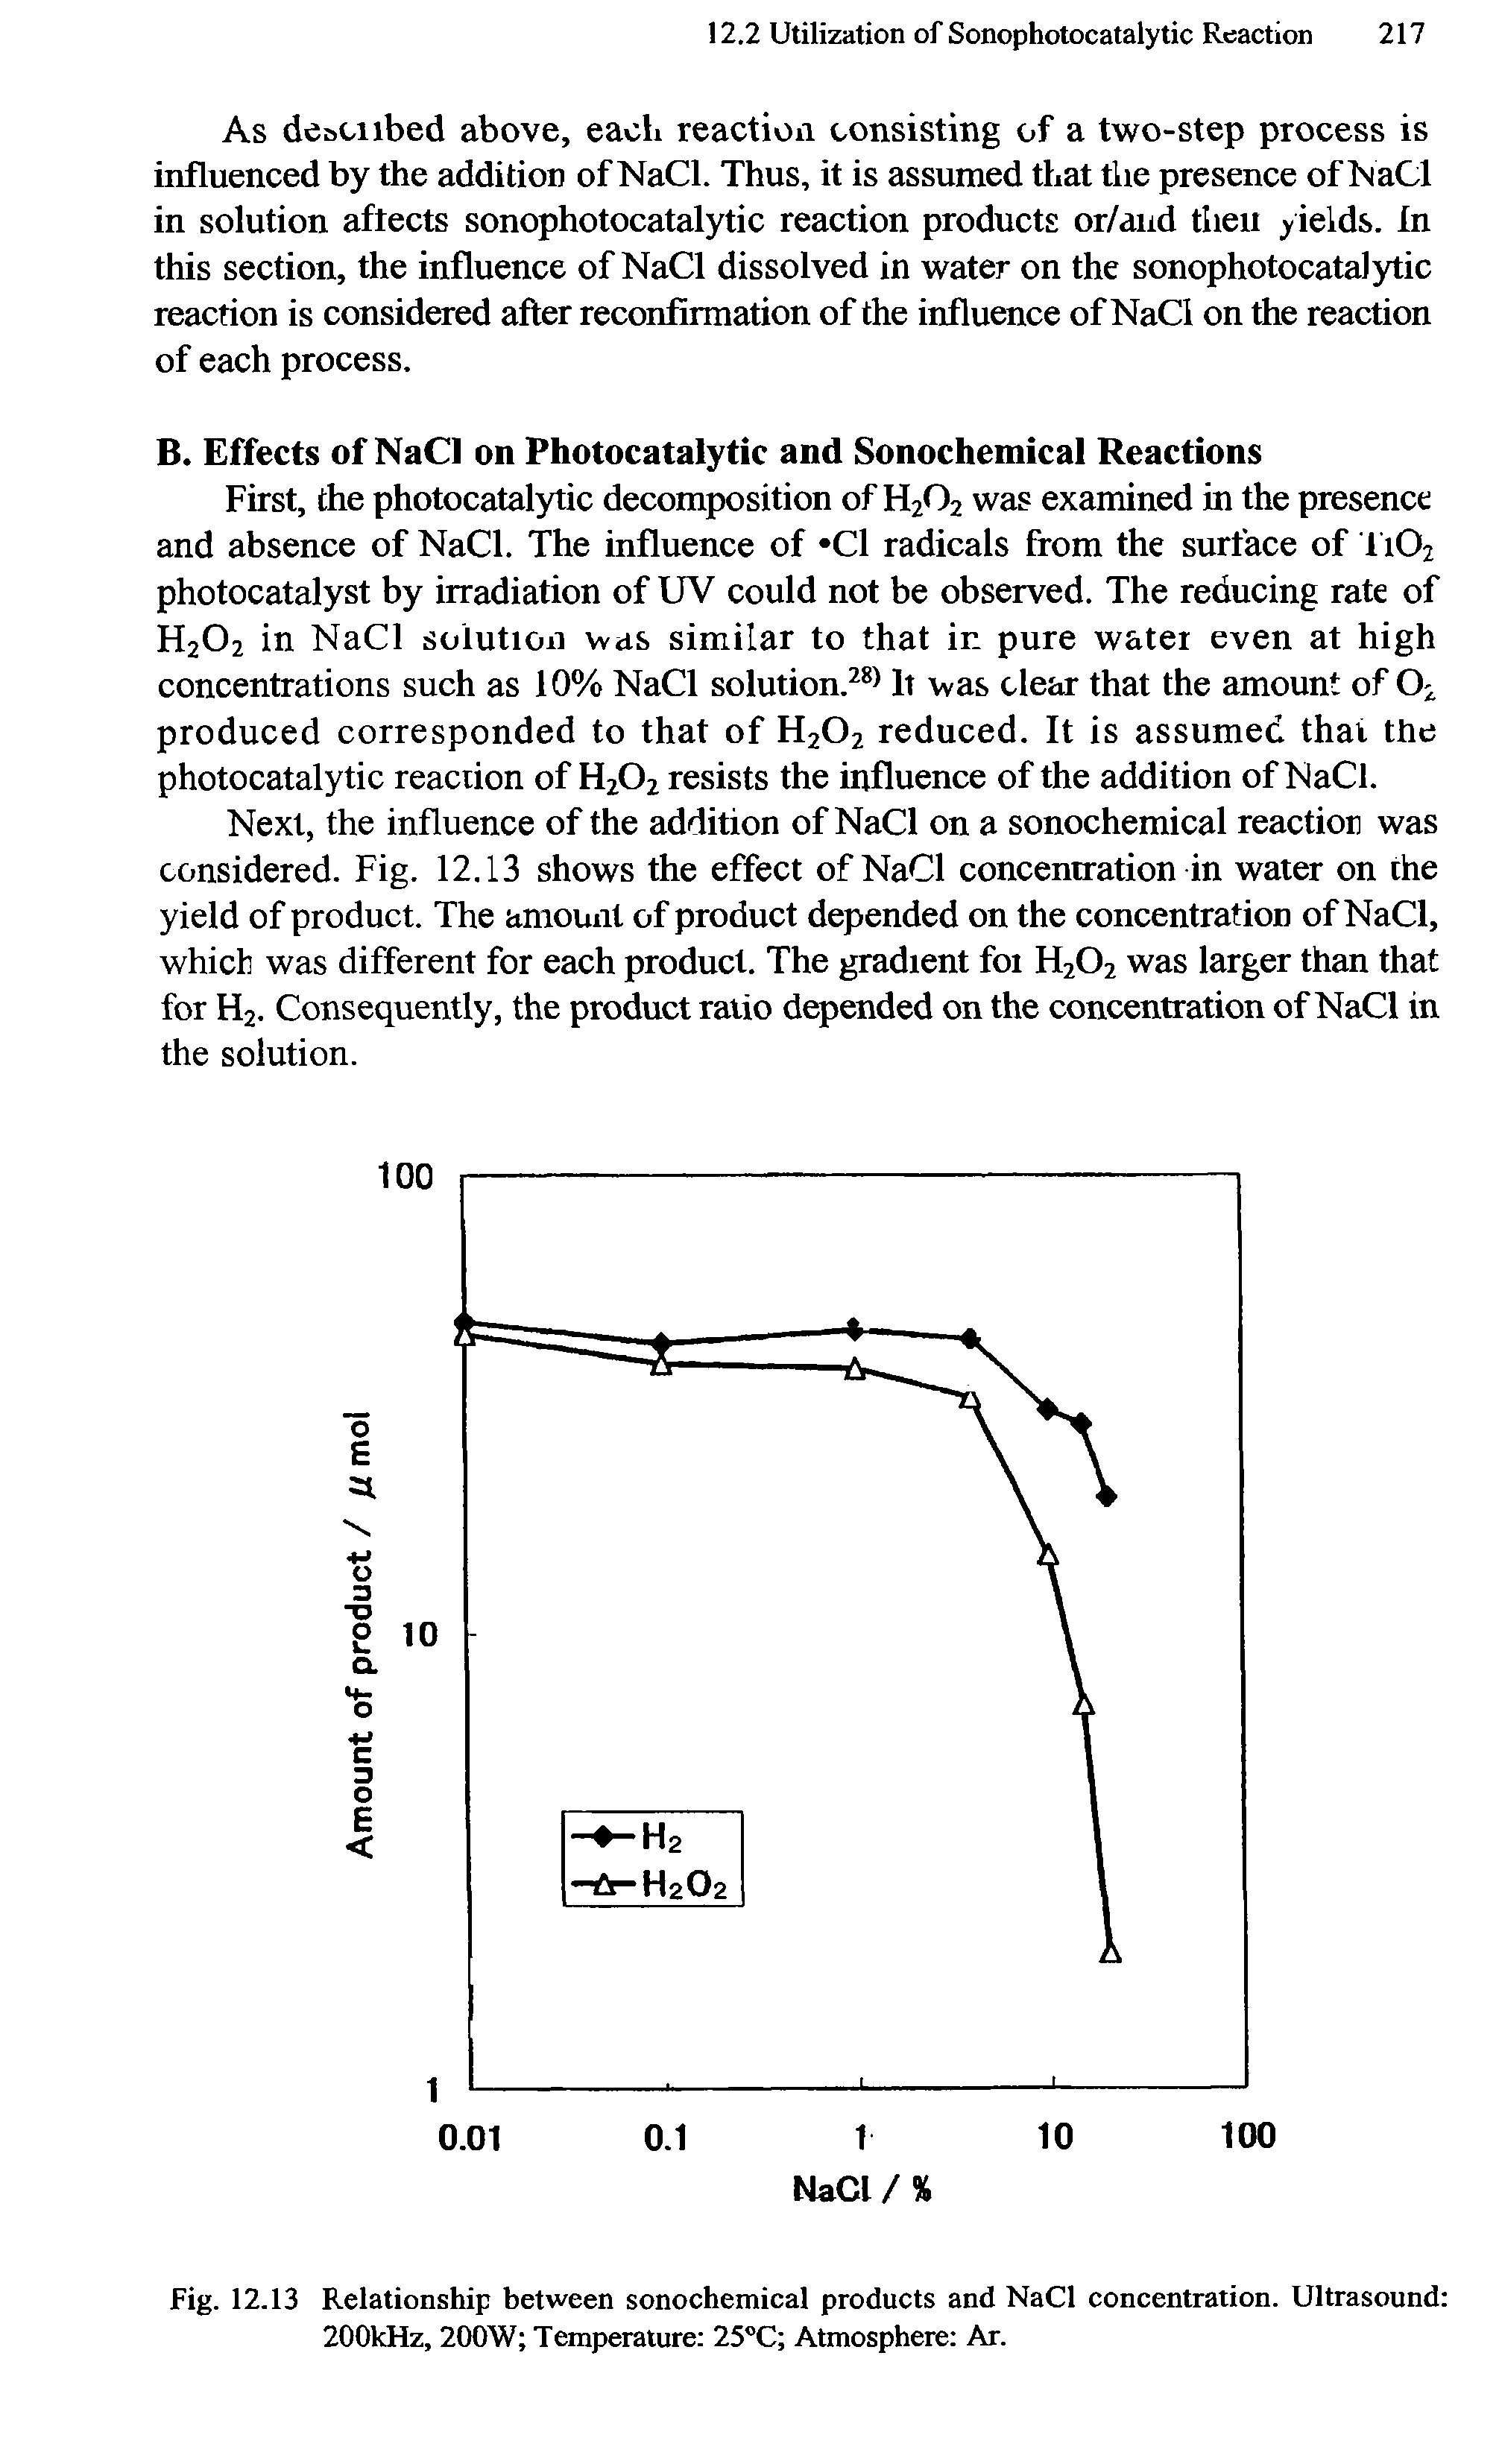 Fig. 12.13 Relationship between sonochemical products and NaCl concentration. Ultrasound 200kHz, 200W Temperature 25°C Atmosphere Ar.